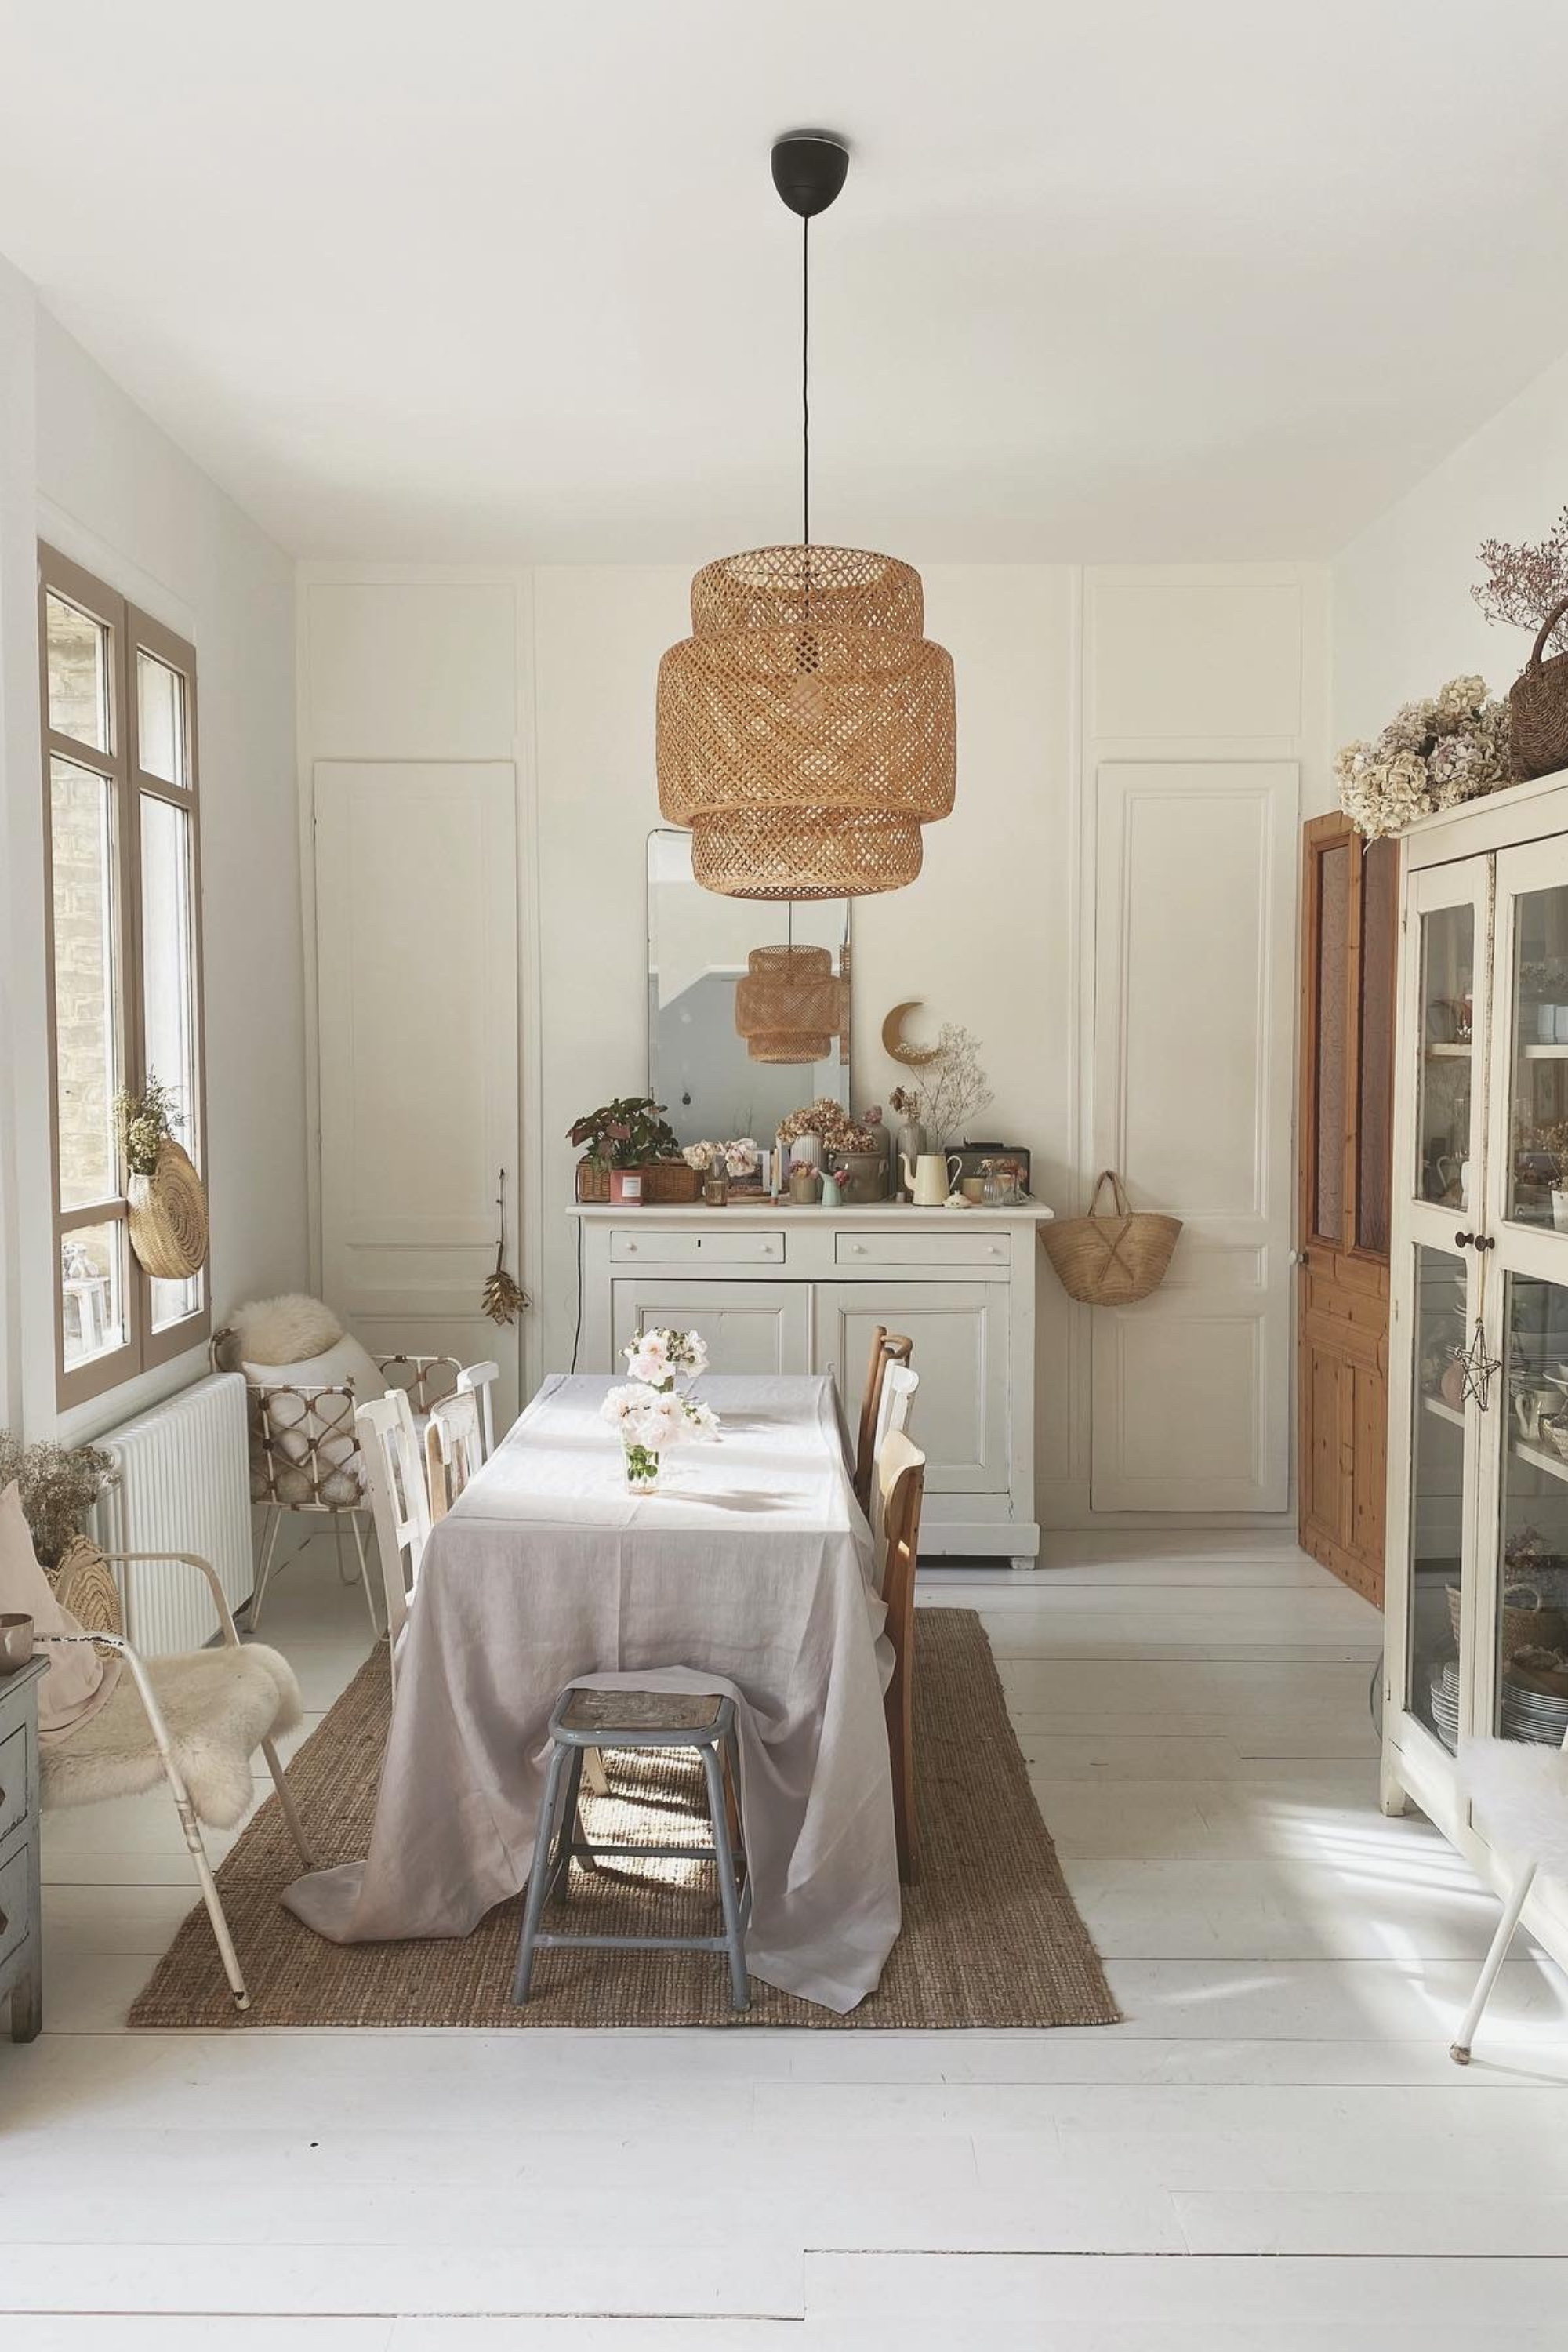 A Rustic Minimalist Kitchen Design With White Accent By AmourLinen